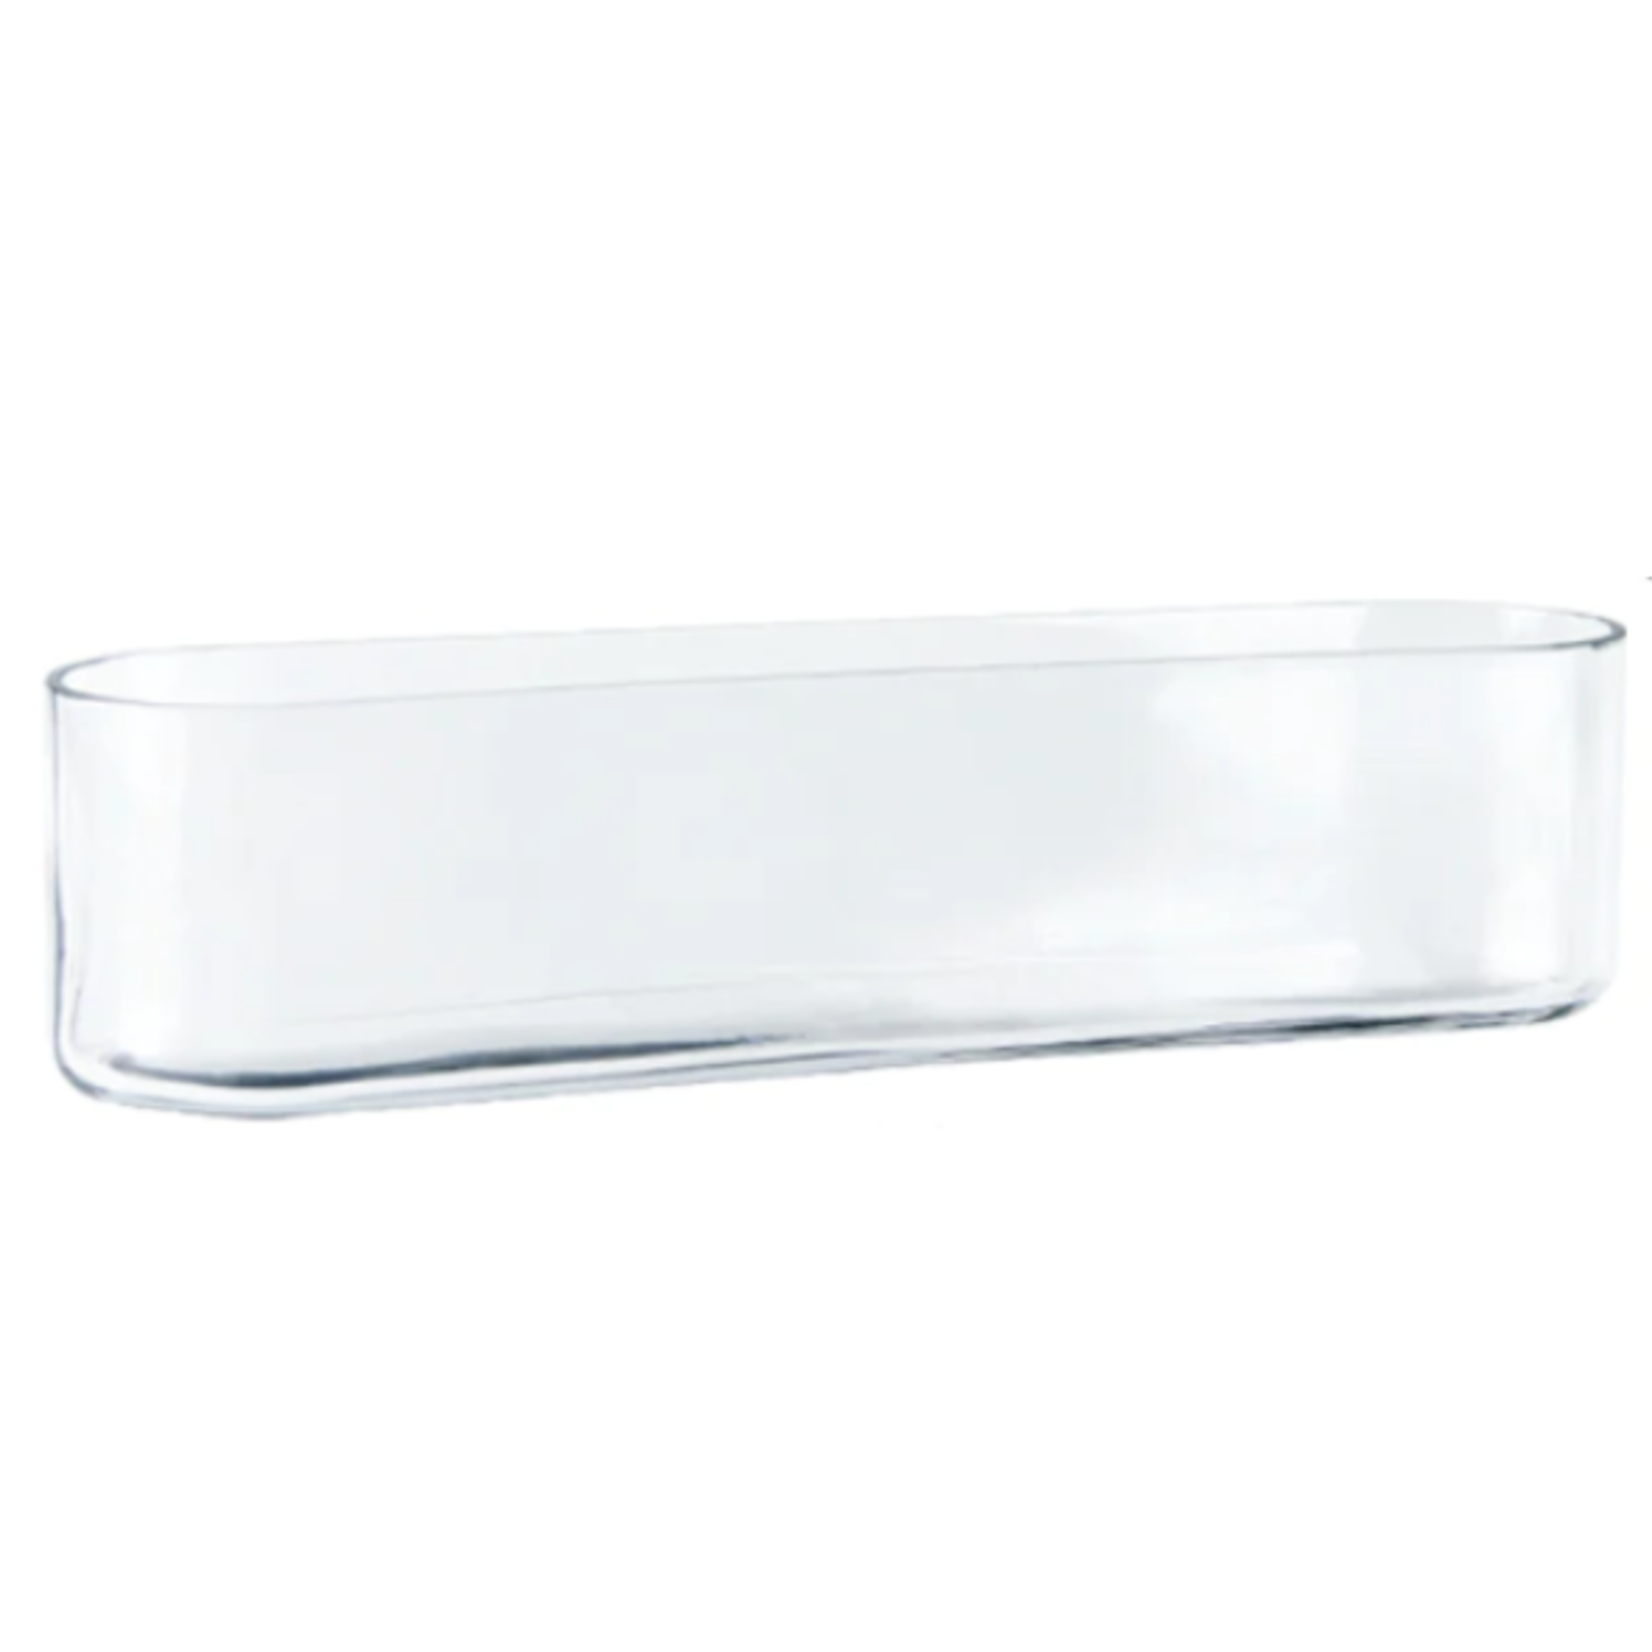 4”H X 16.5”LONG X 4” LONG AND GLOW GLASS RECTANGLE WITH OVAL CORNERS